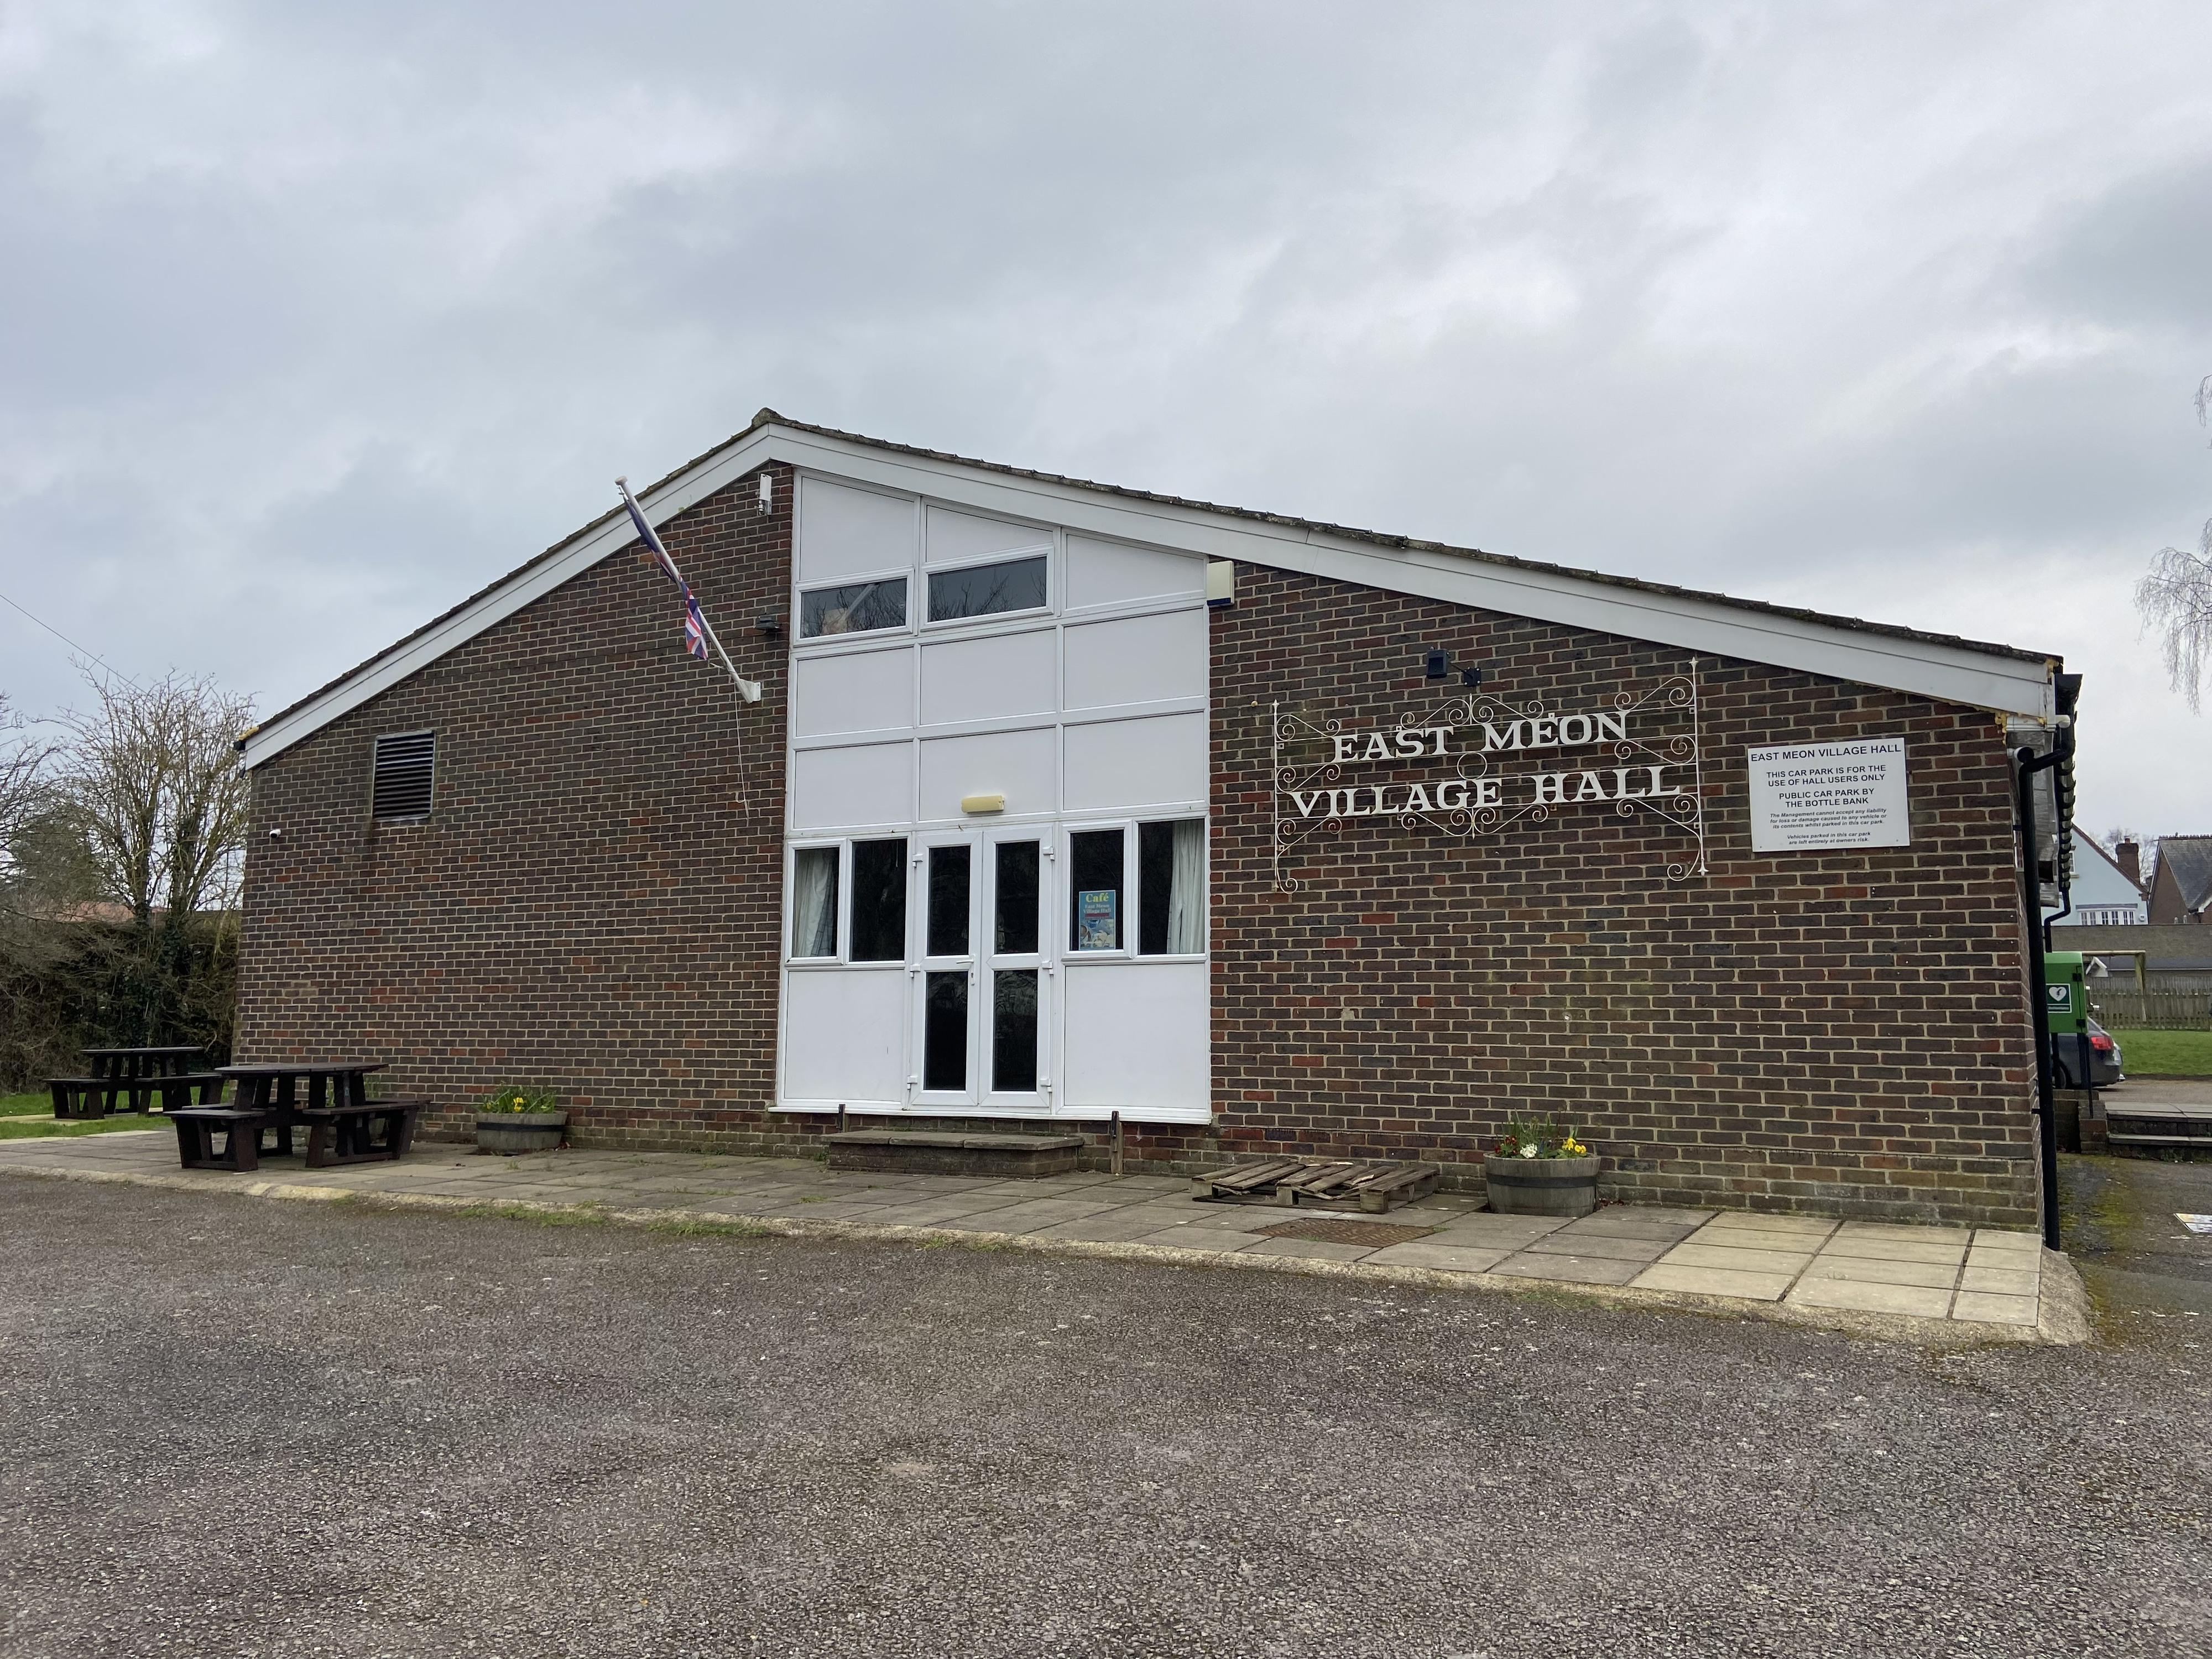 East Meon’s fifty year old village hall  is now ready for an upgrade